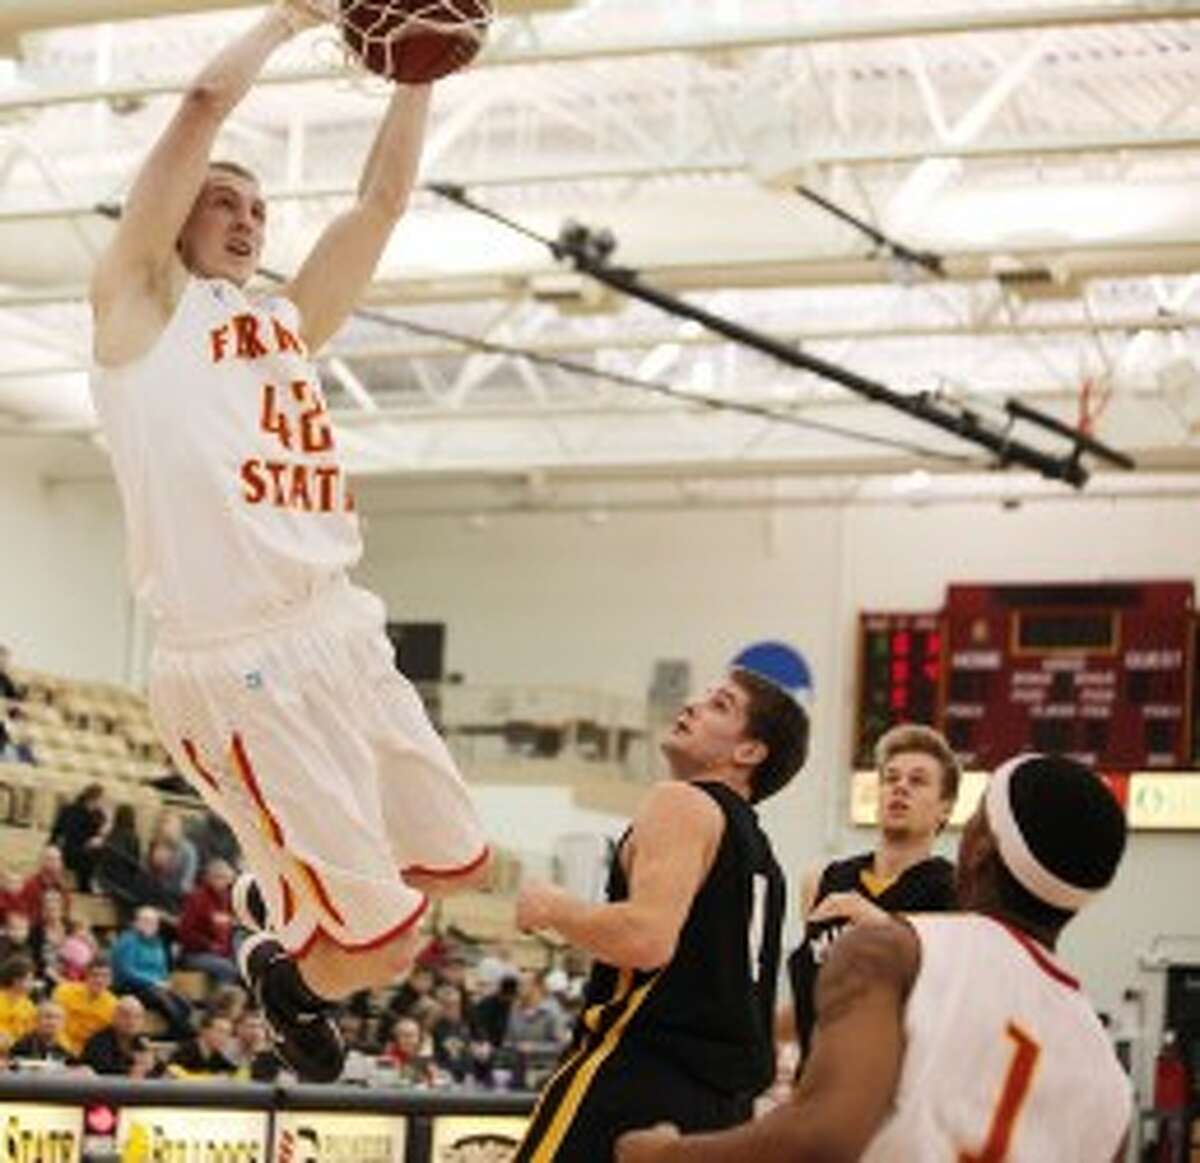 JAM TIME: Ferris State's Trent Messer stuffs home a dunk early on against Michigan Tech. (Pioneer photo/Martin Slagter)